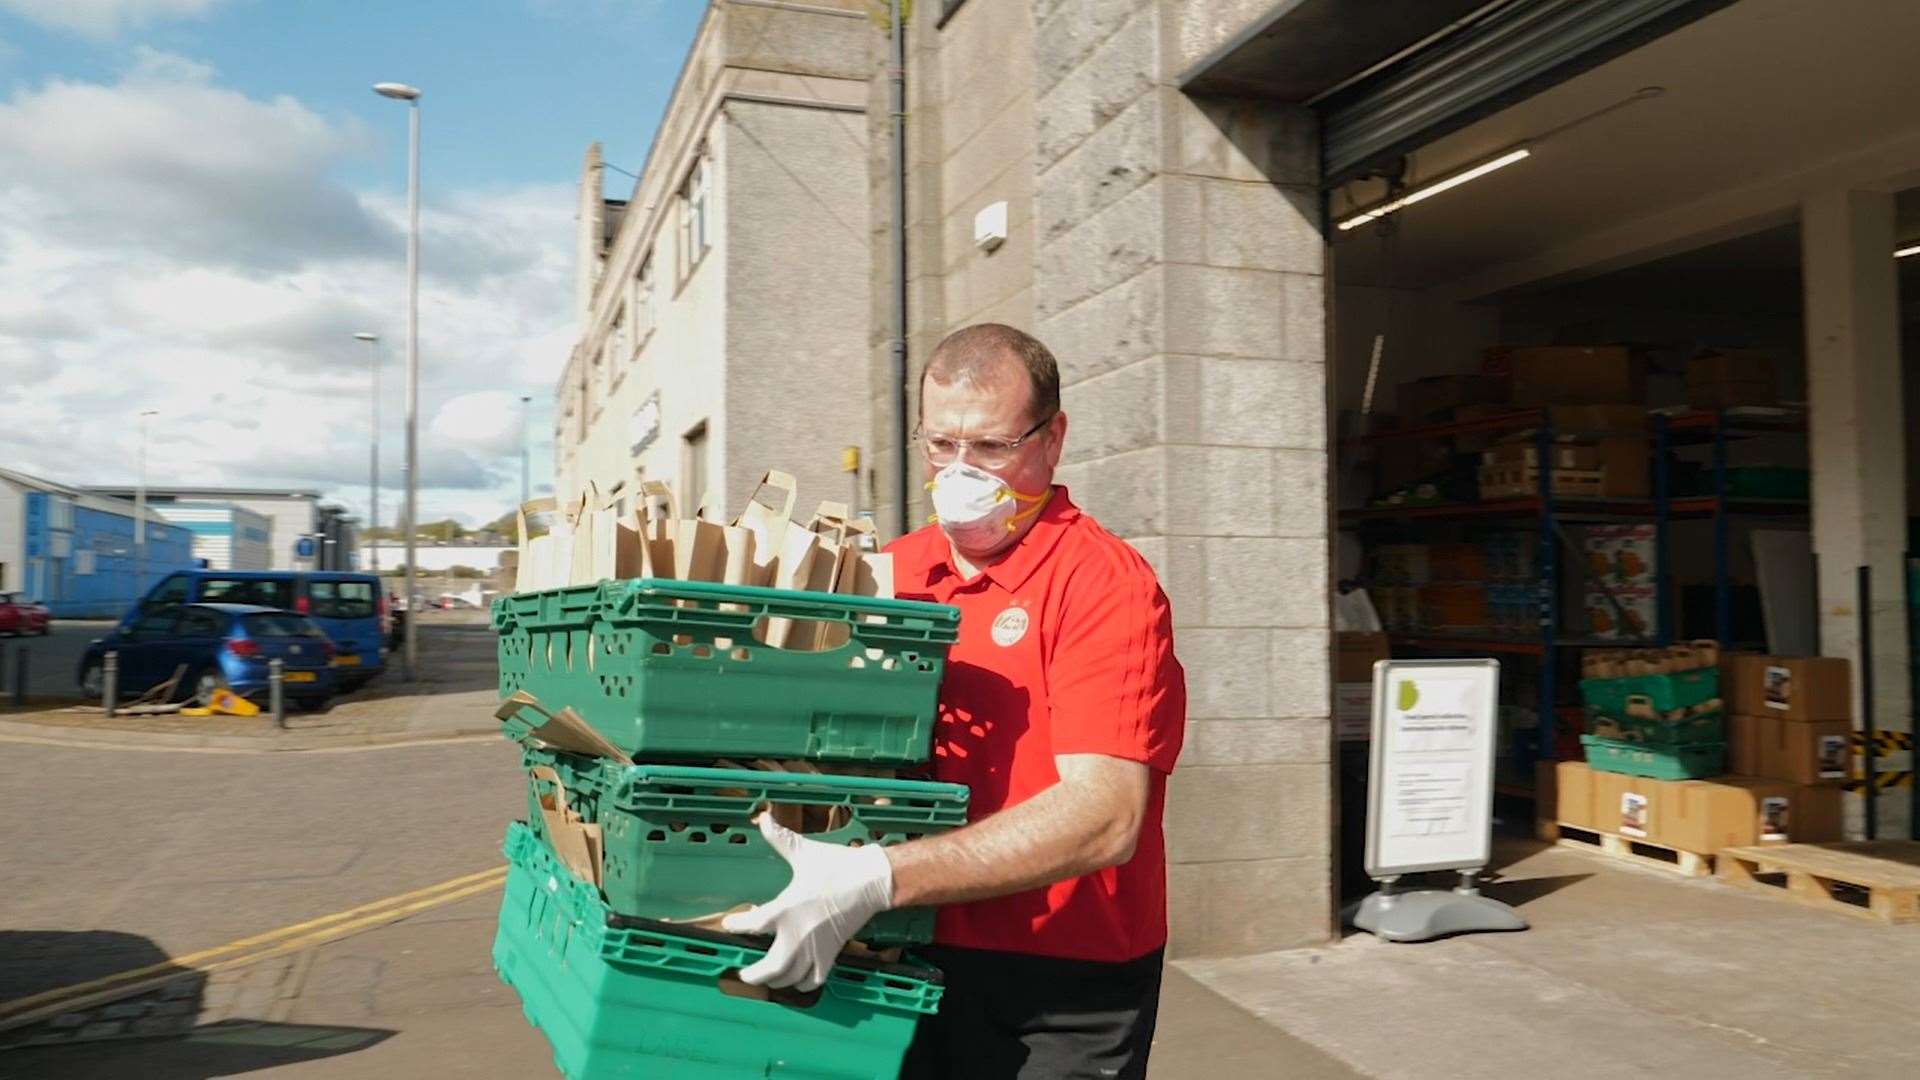 Aberdeen Football Club Trust marked their 1000th delivery to those in need.